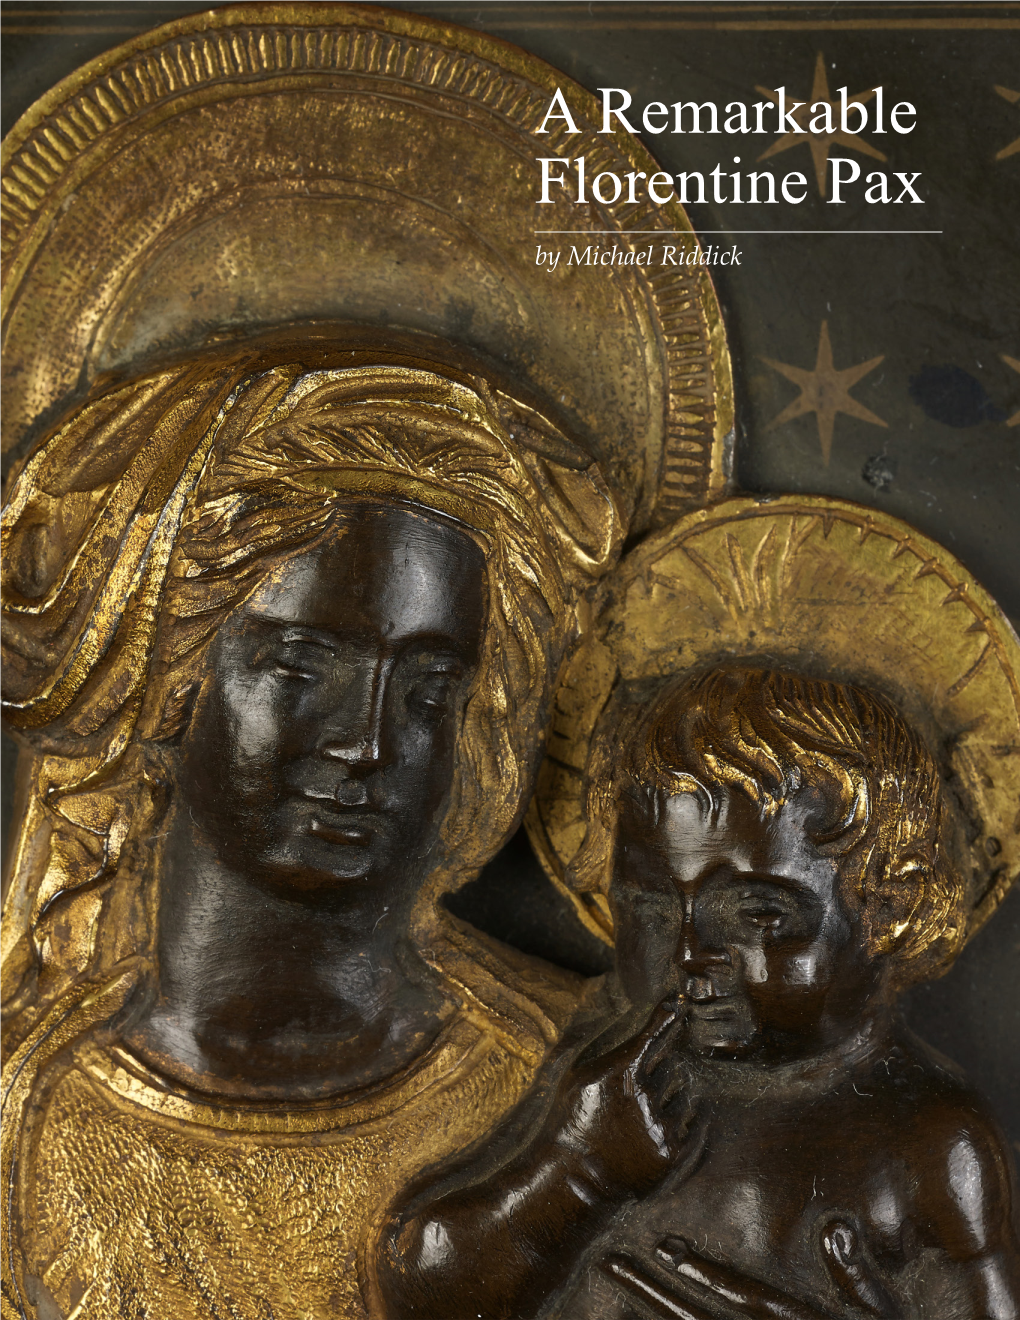 A Remarkable Florentine Pax by Michael Riddick a Remarkable Florentine Pax